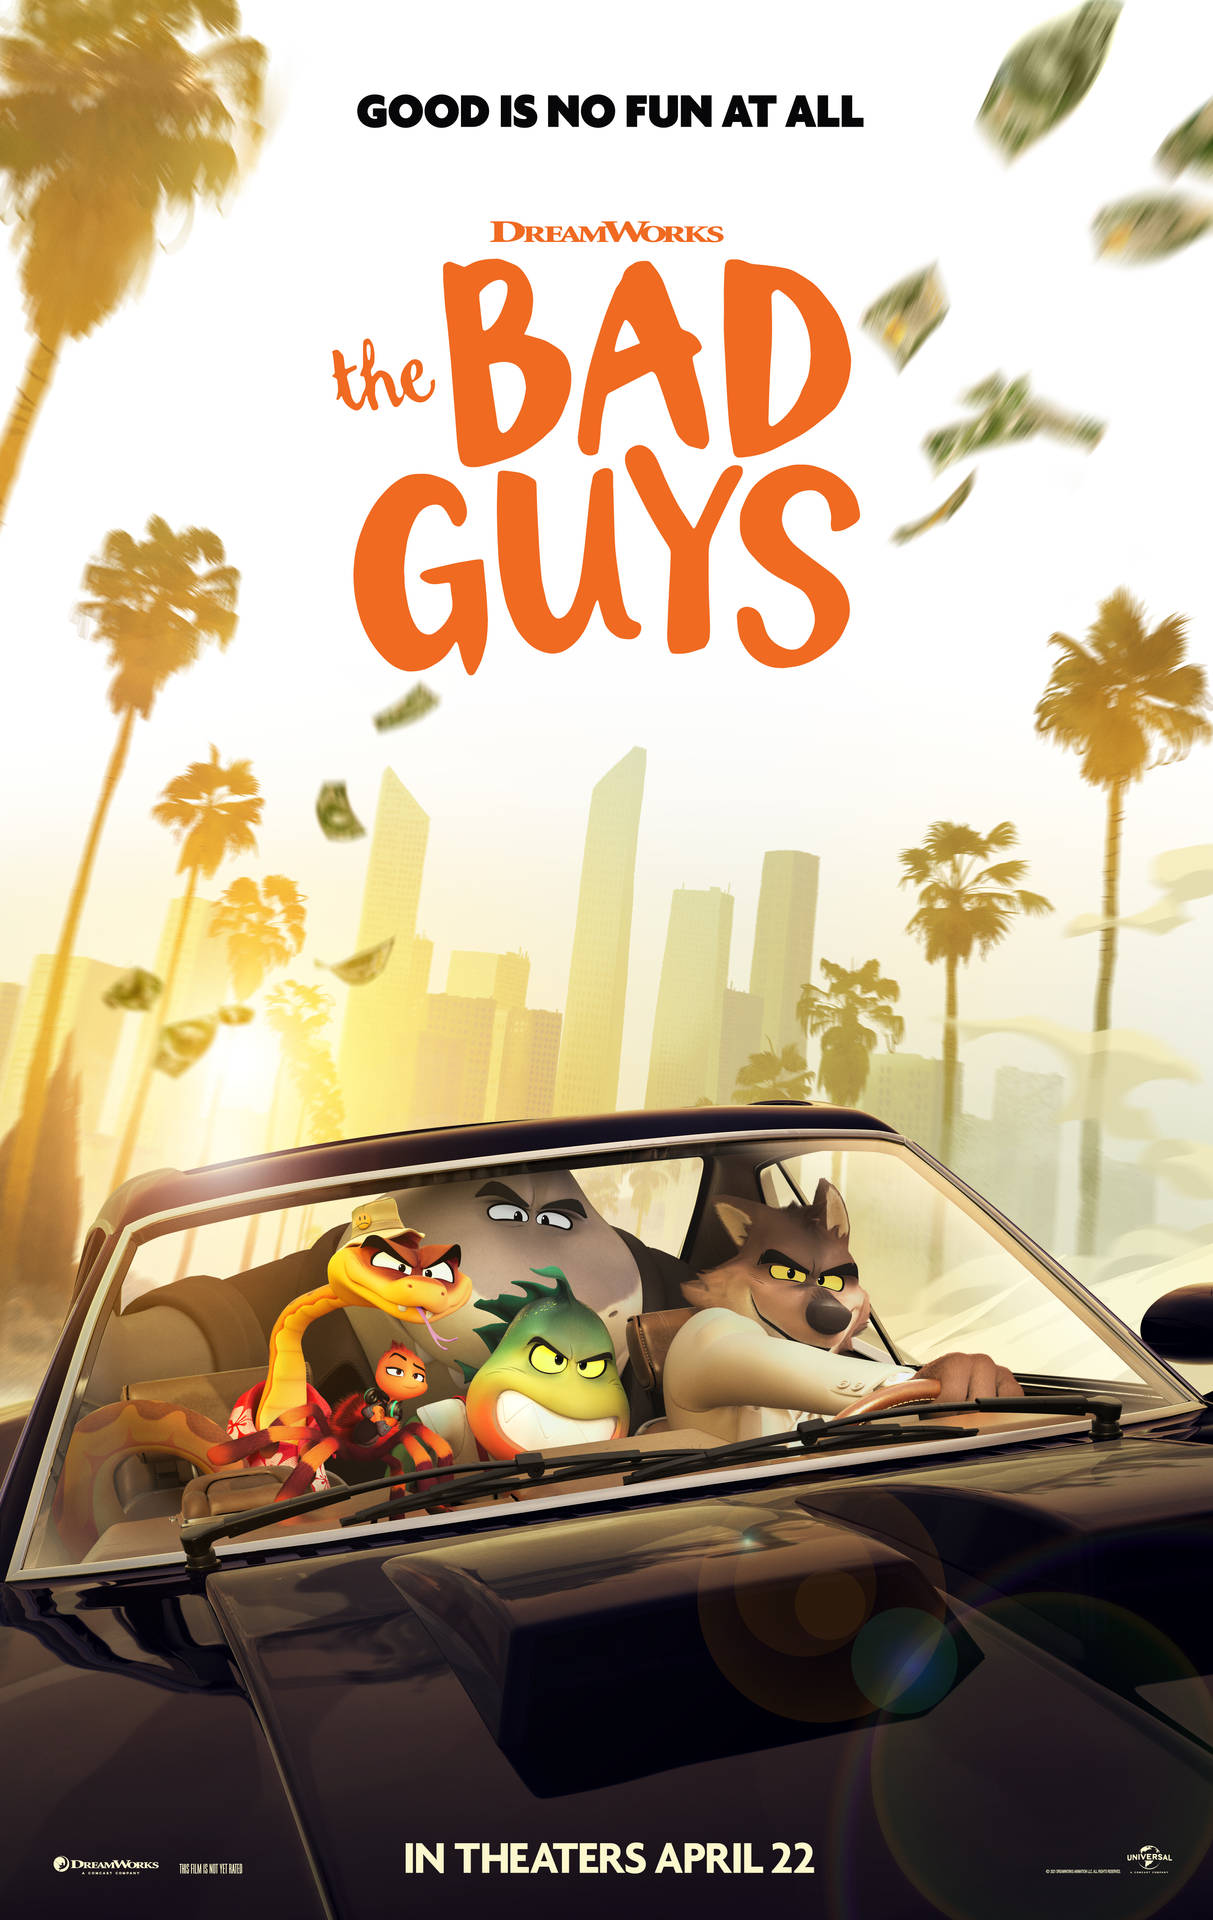 The Bad Guys Dreamworks Poster Background